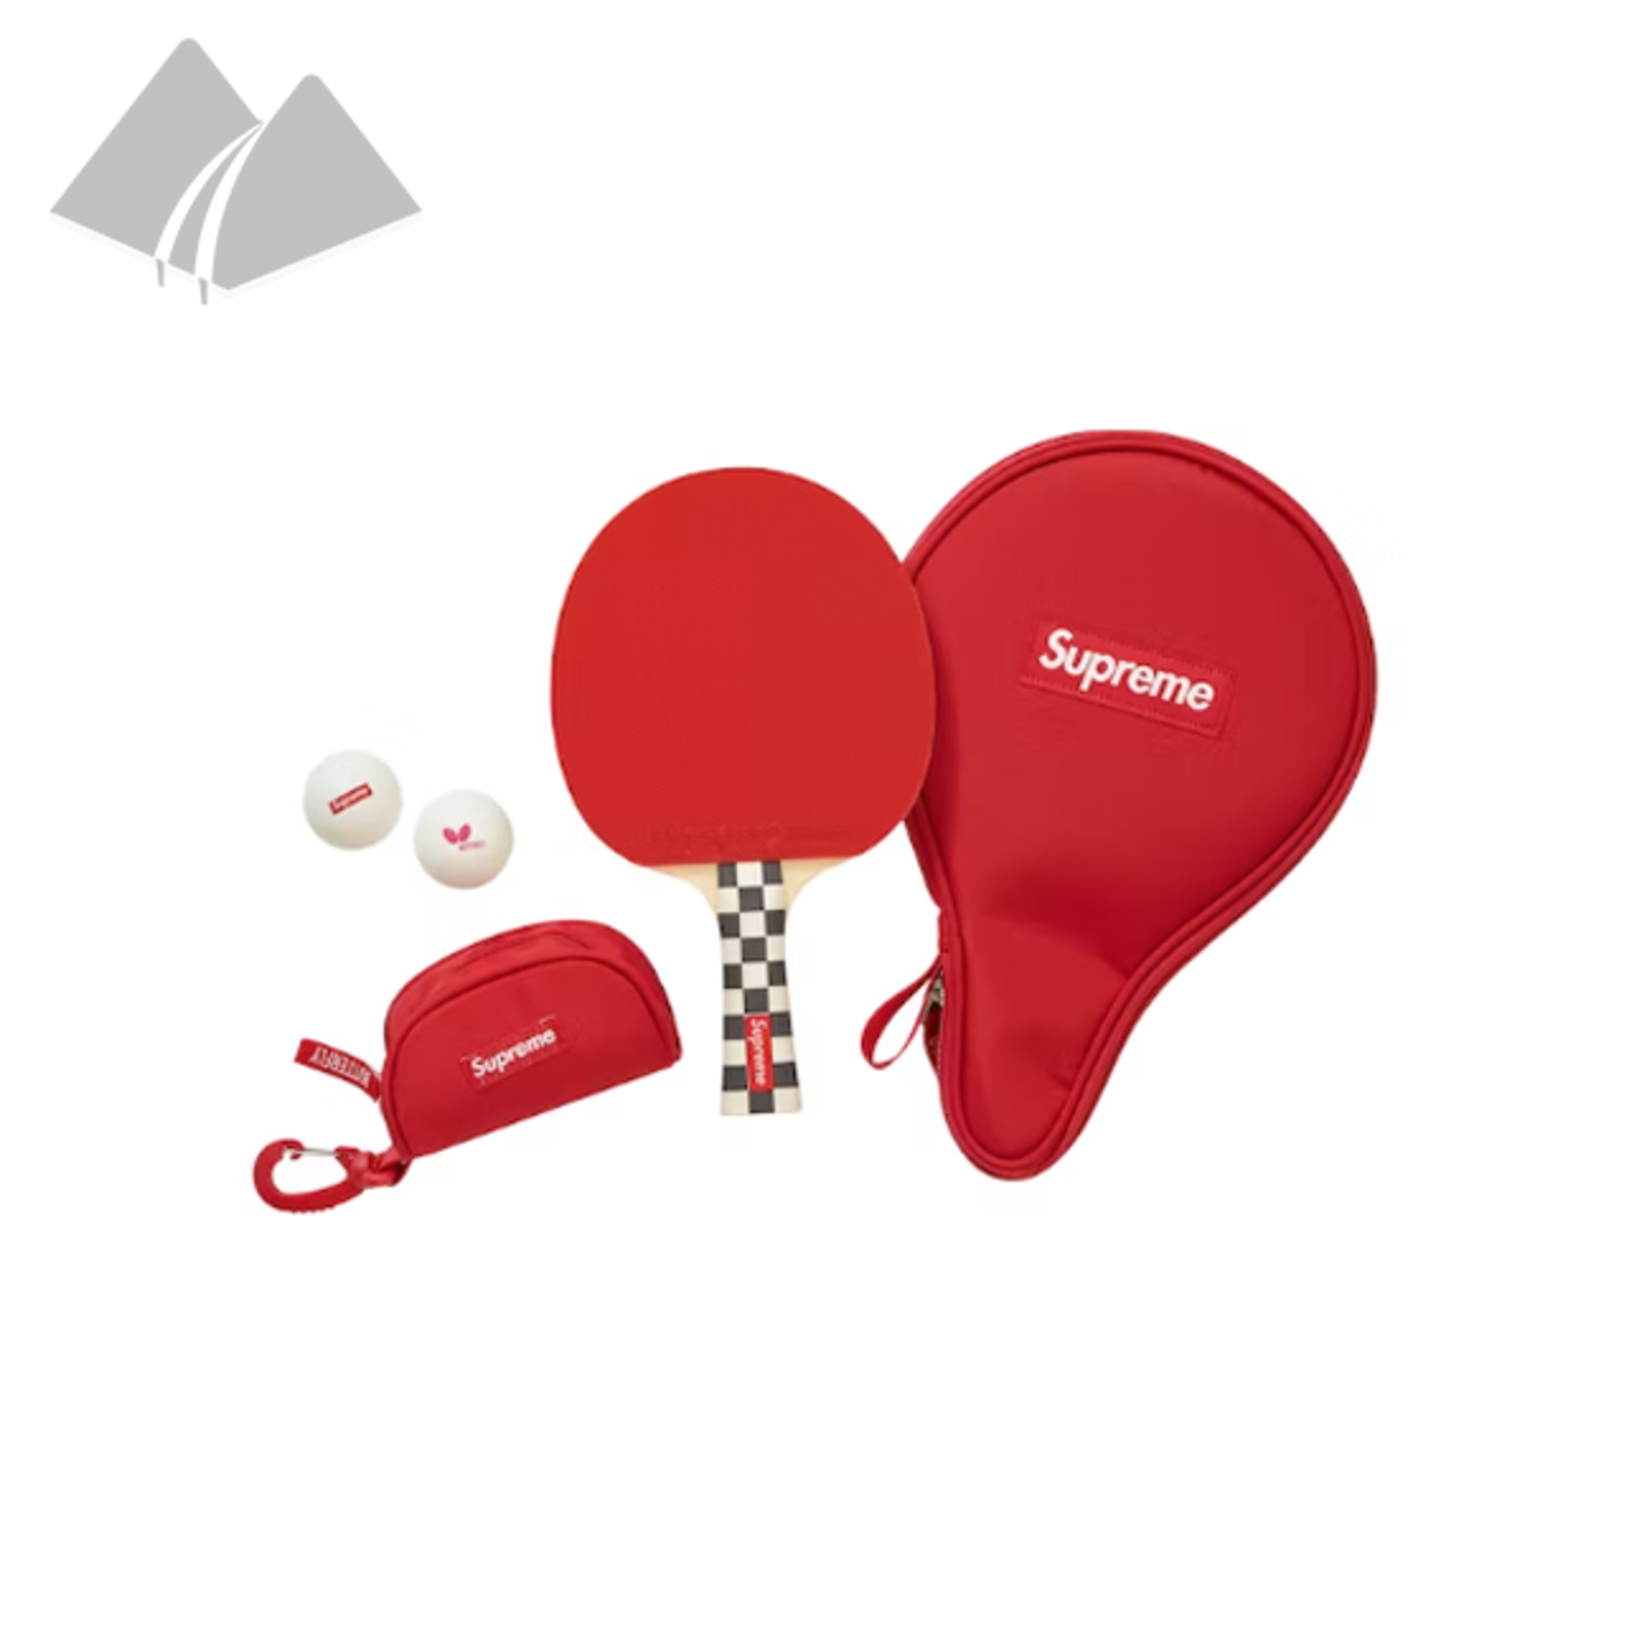 Supreme Supreme Butterfly Table Tennis Racket Set Checkerboard